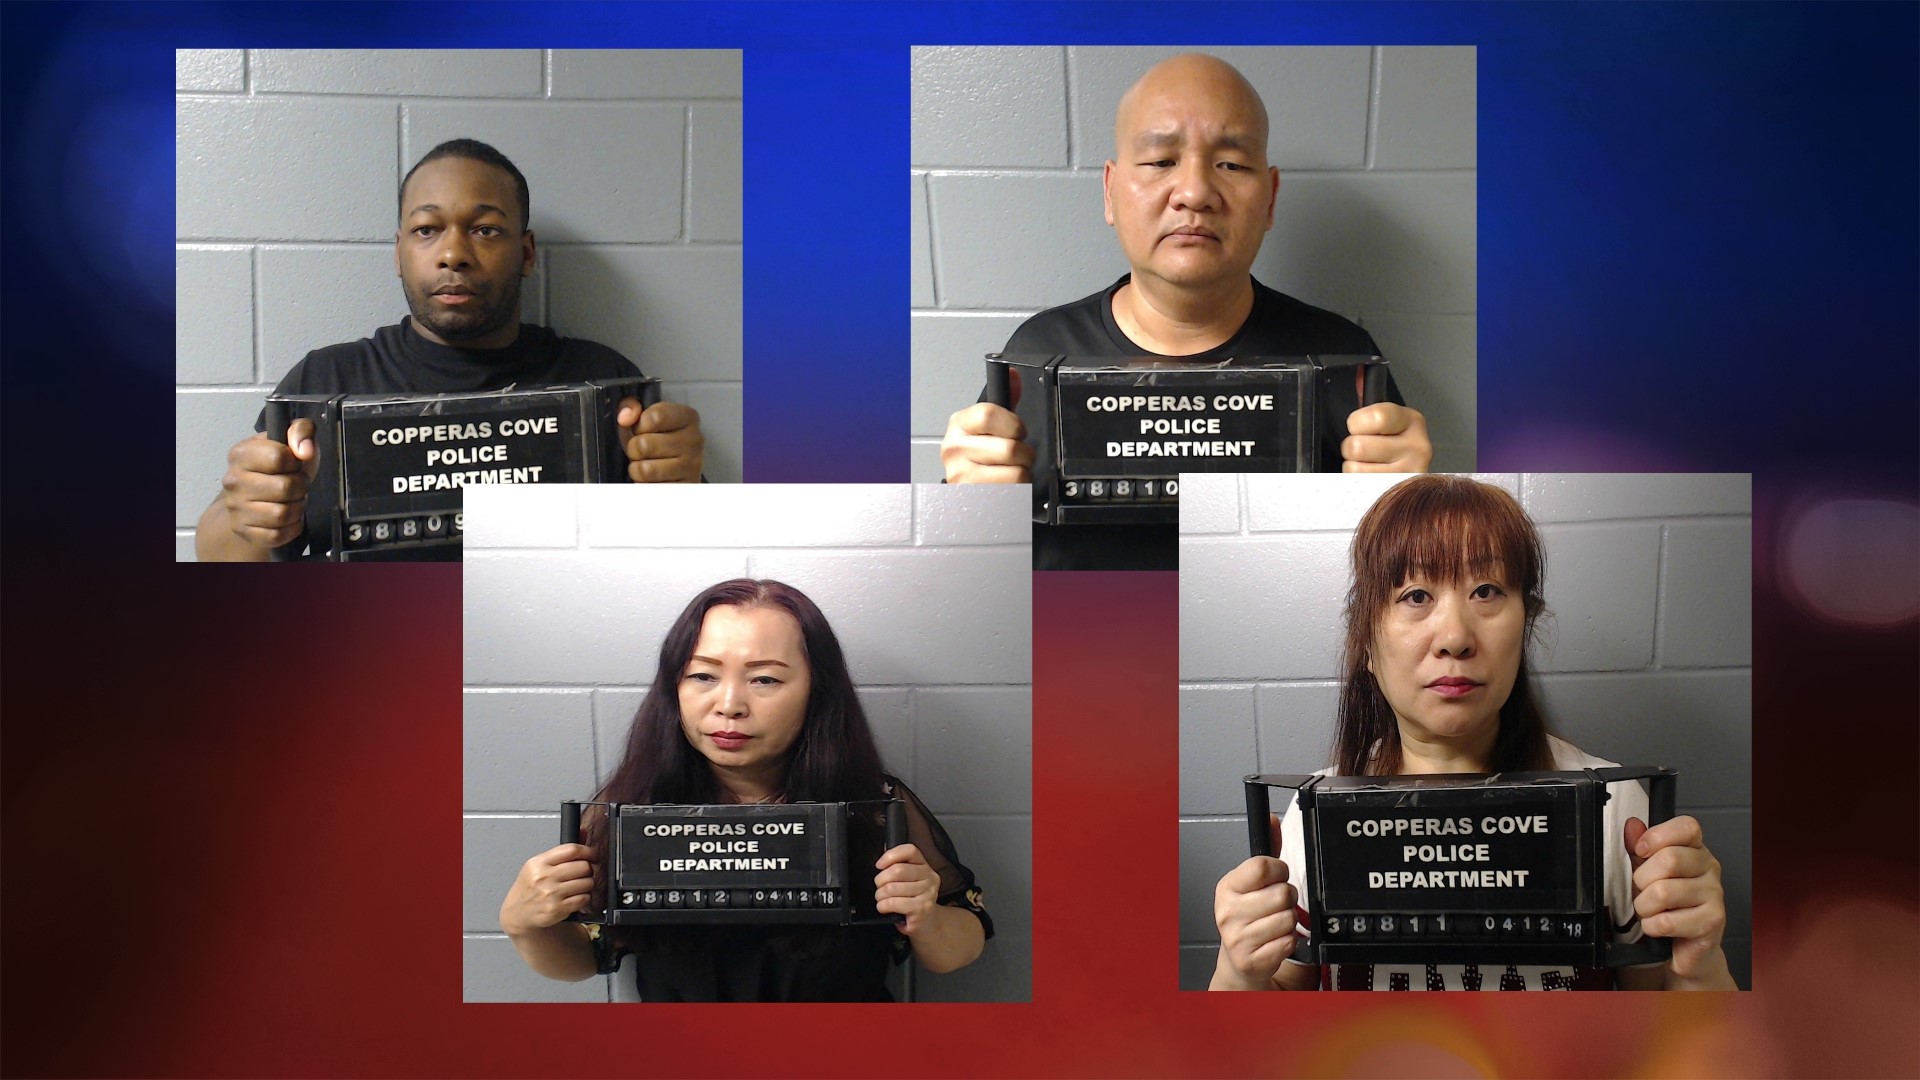 Multiple Arrests Made In Prostitution Sting At Massage Parlor In Copperas Cove